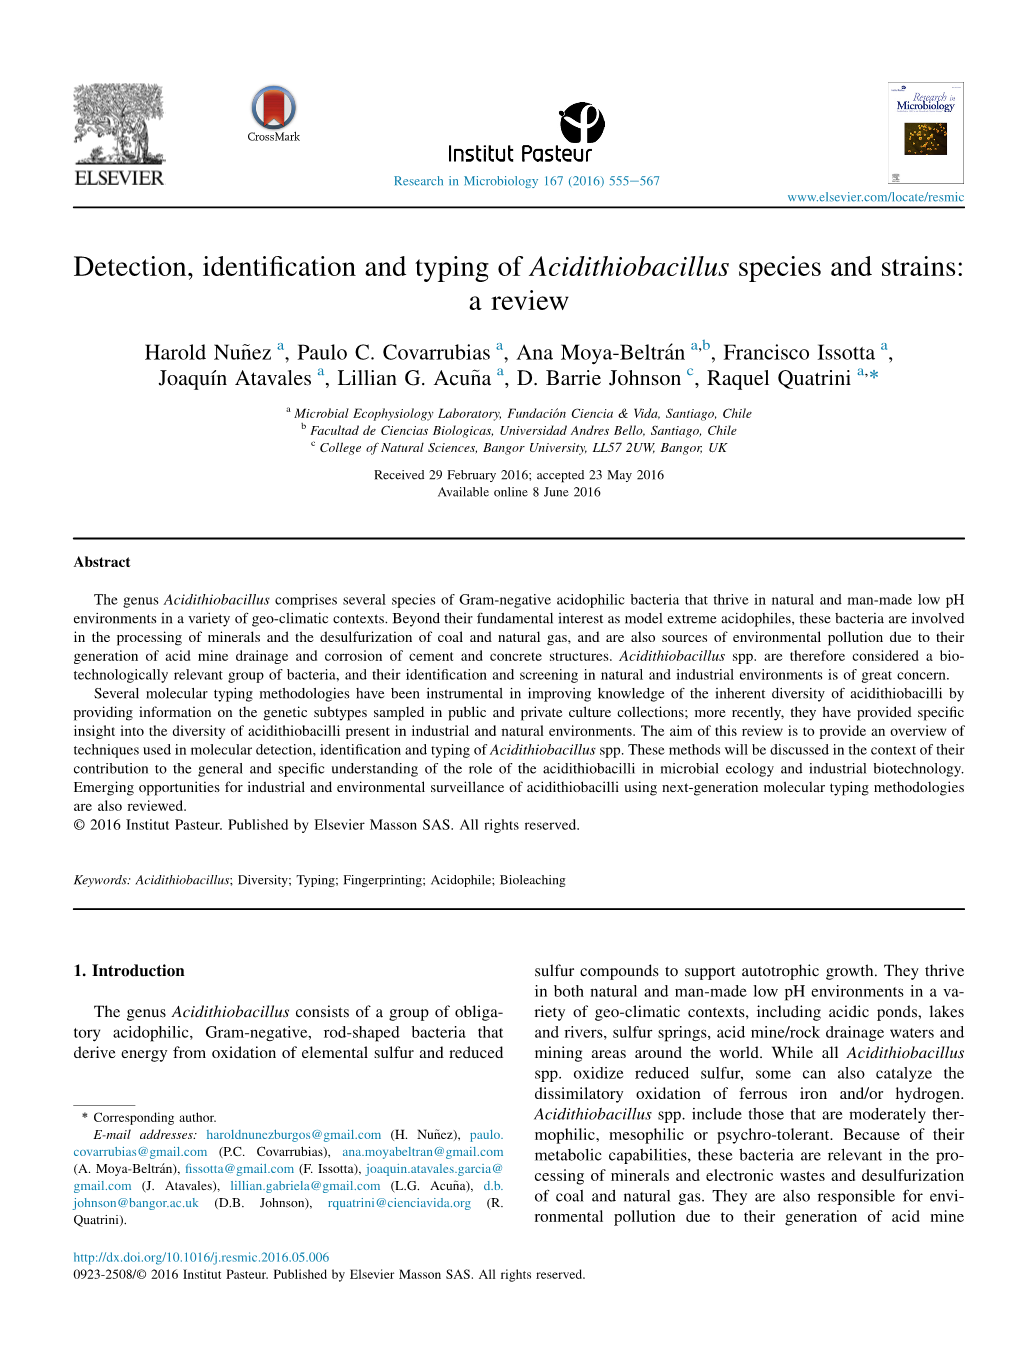 Detection, Identification and Typing of Acidithiobacillus Species and Strains